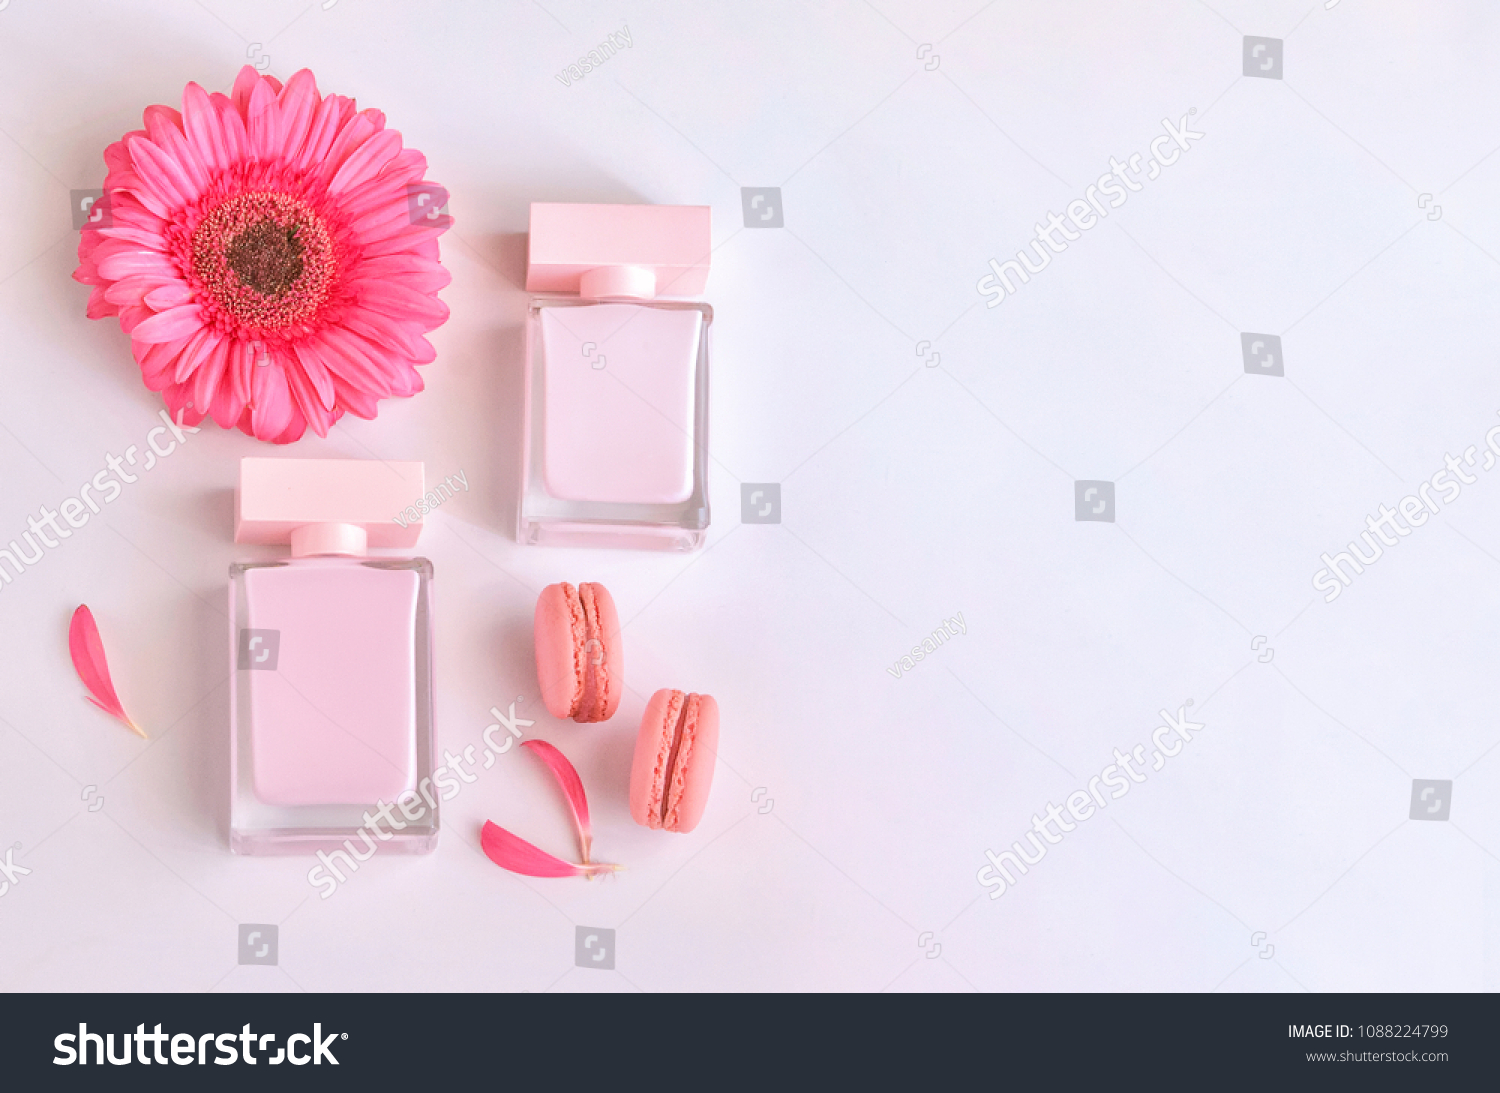 Beautiful perfume bottle with pink flowers and macaroons.  Luxury perfumery background with copy space. Sweet and Floral fragrance concept. #1088224799